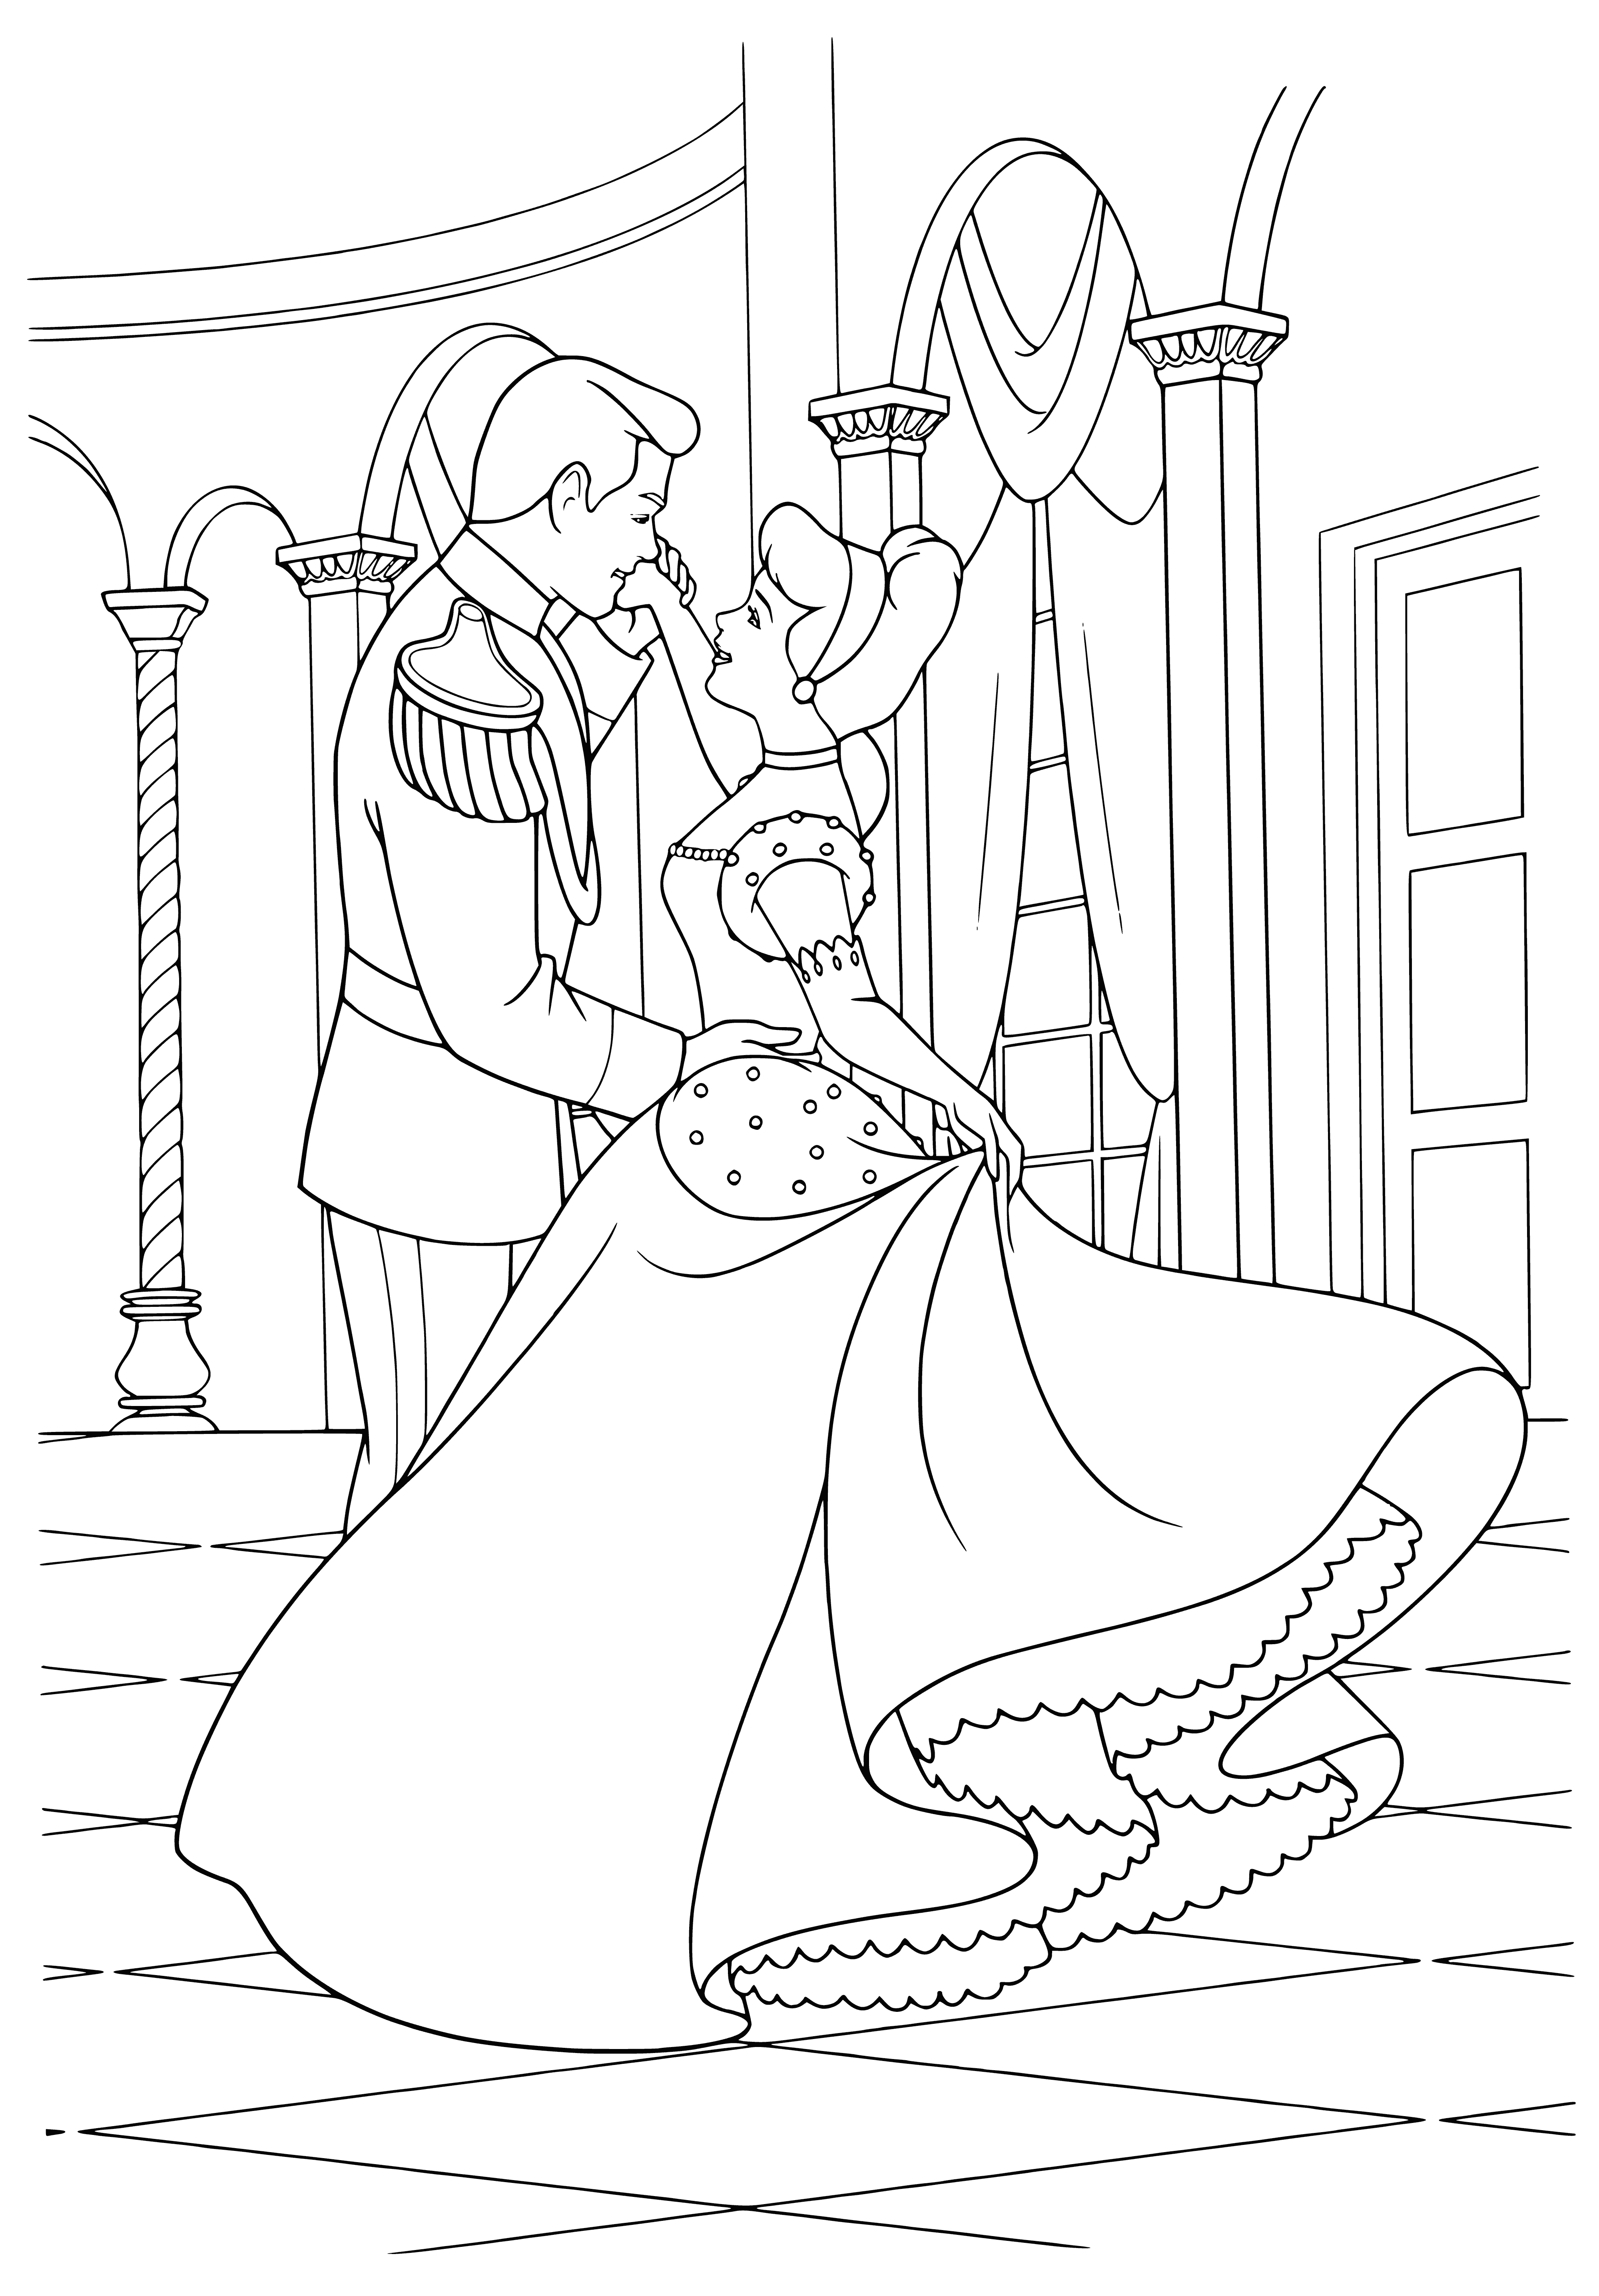 coloring page: Cinderella & Prince dancing happily in beautiful dress & suit, both with big smiles on their faces.